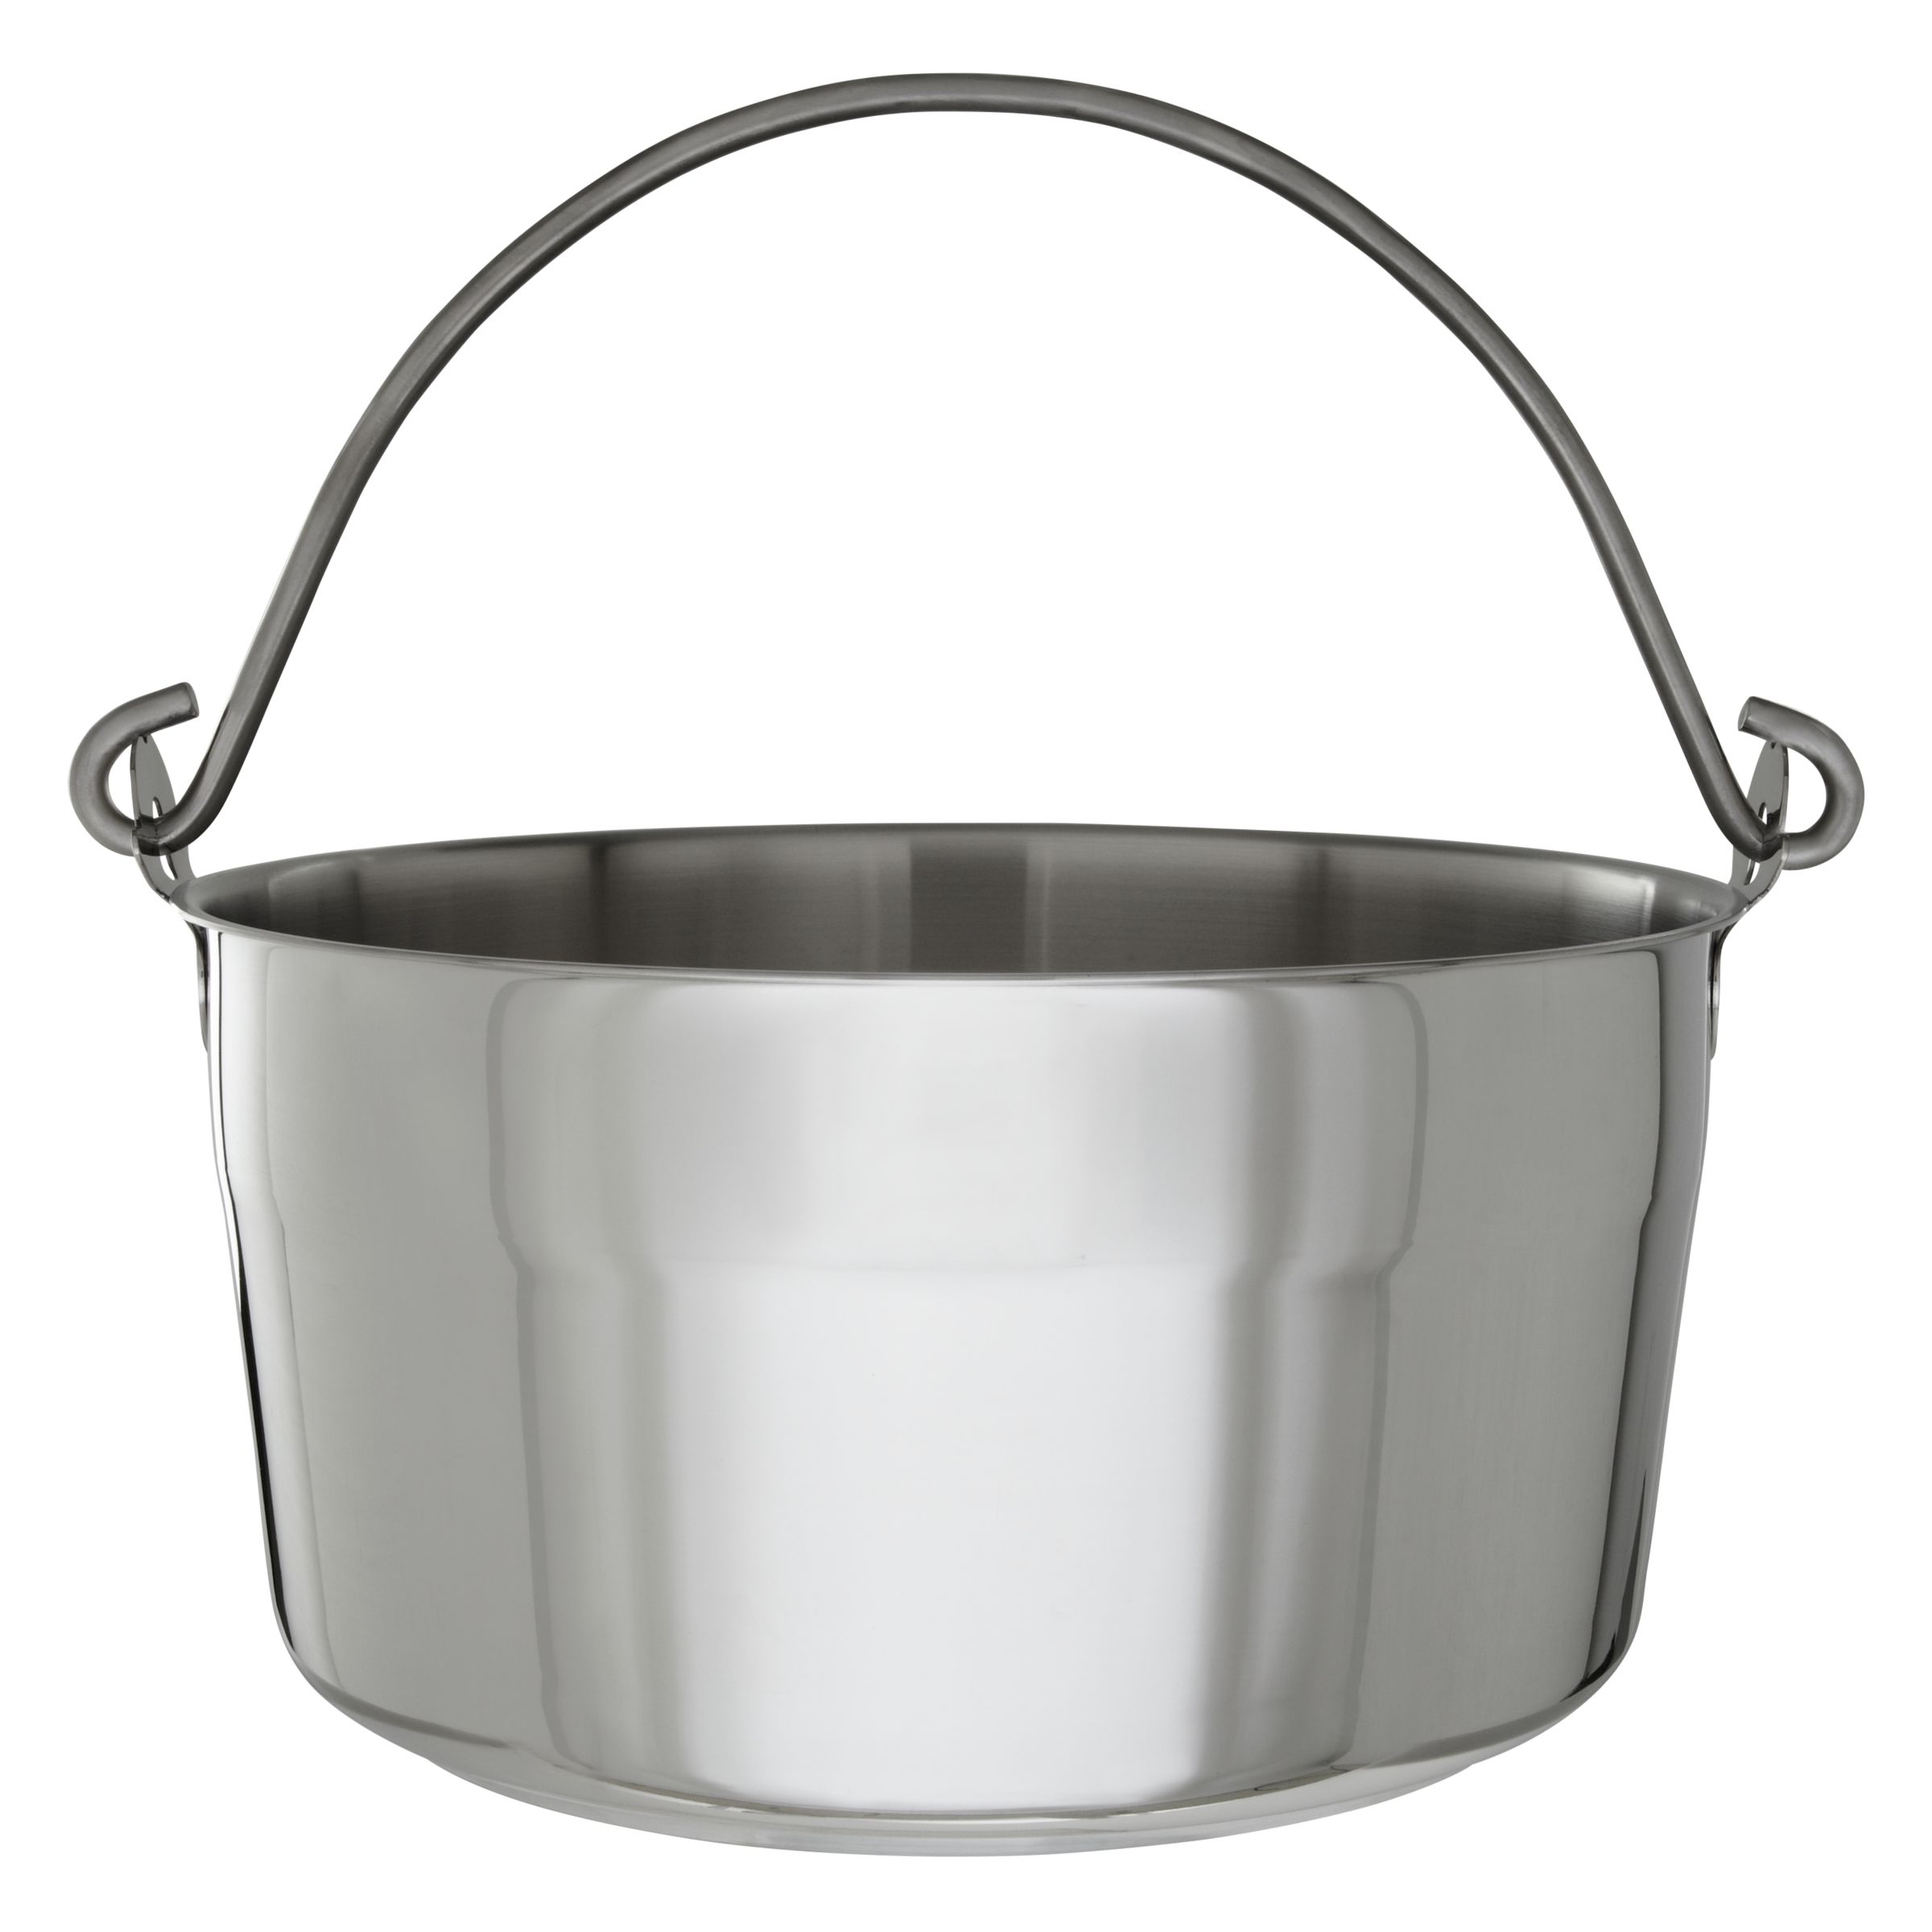 Speciality Maslin Pan, 9L